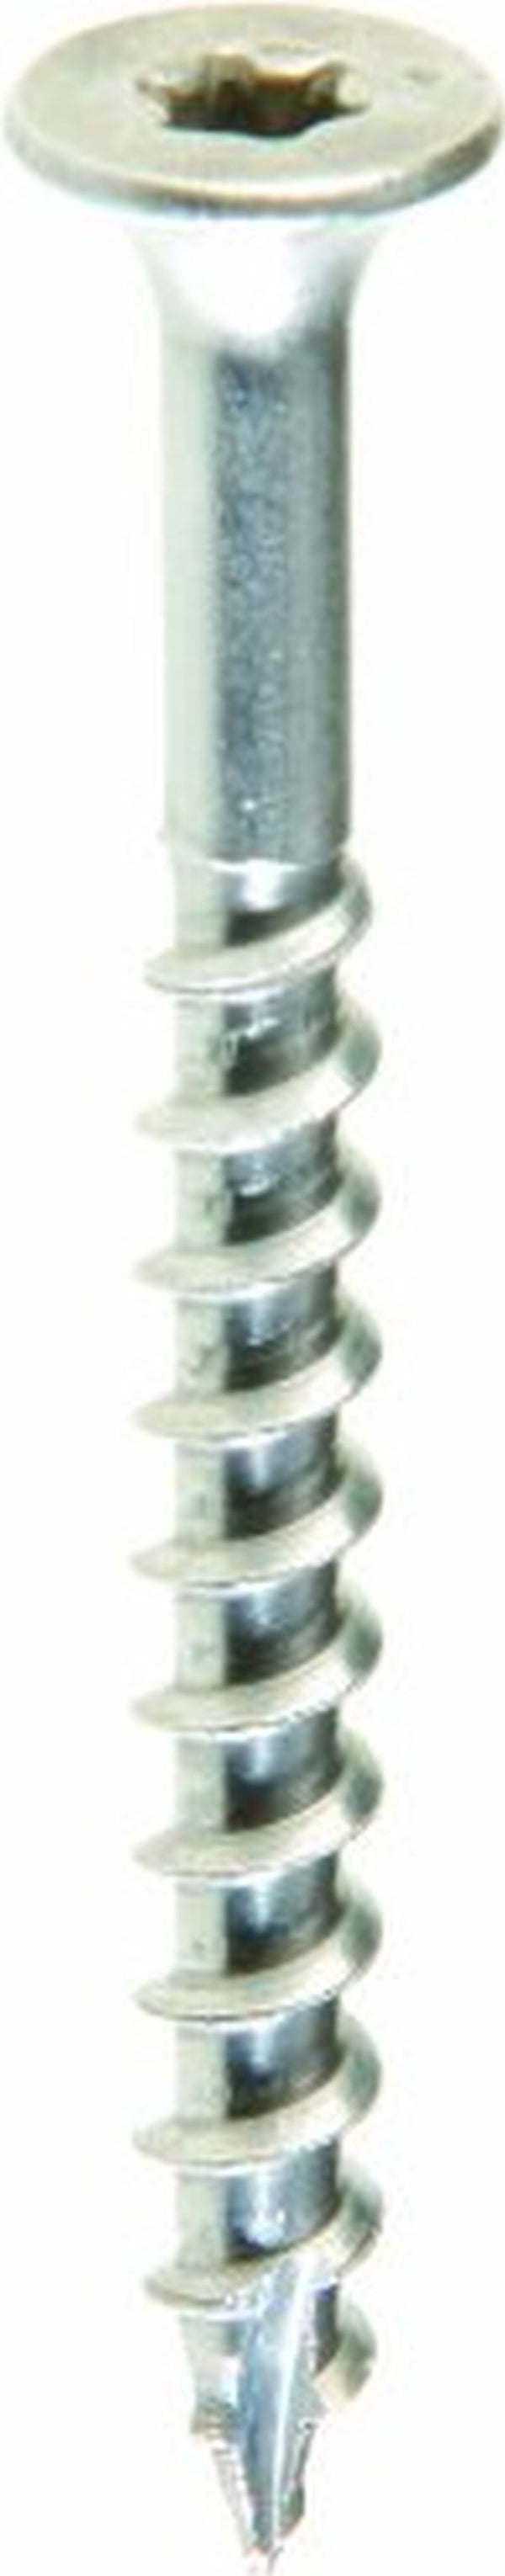 Grip Rite MAXS1588DS3051 #8 x 1-5/8 in. 305 Stainless Steel Deck Screw (1lb -Pack)